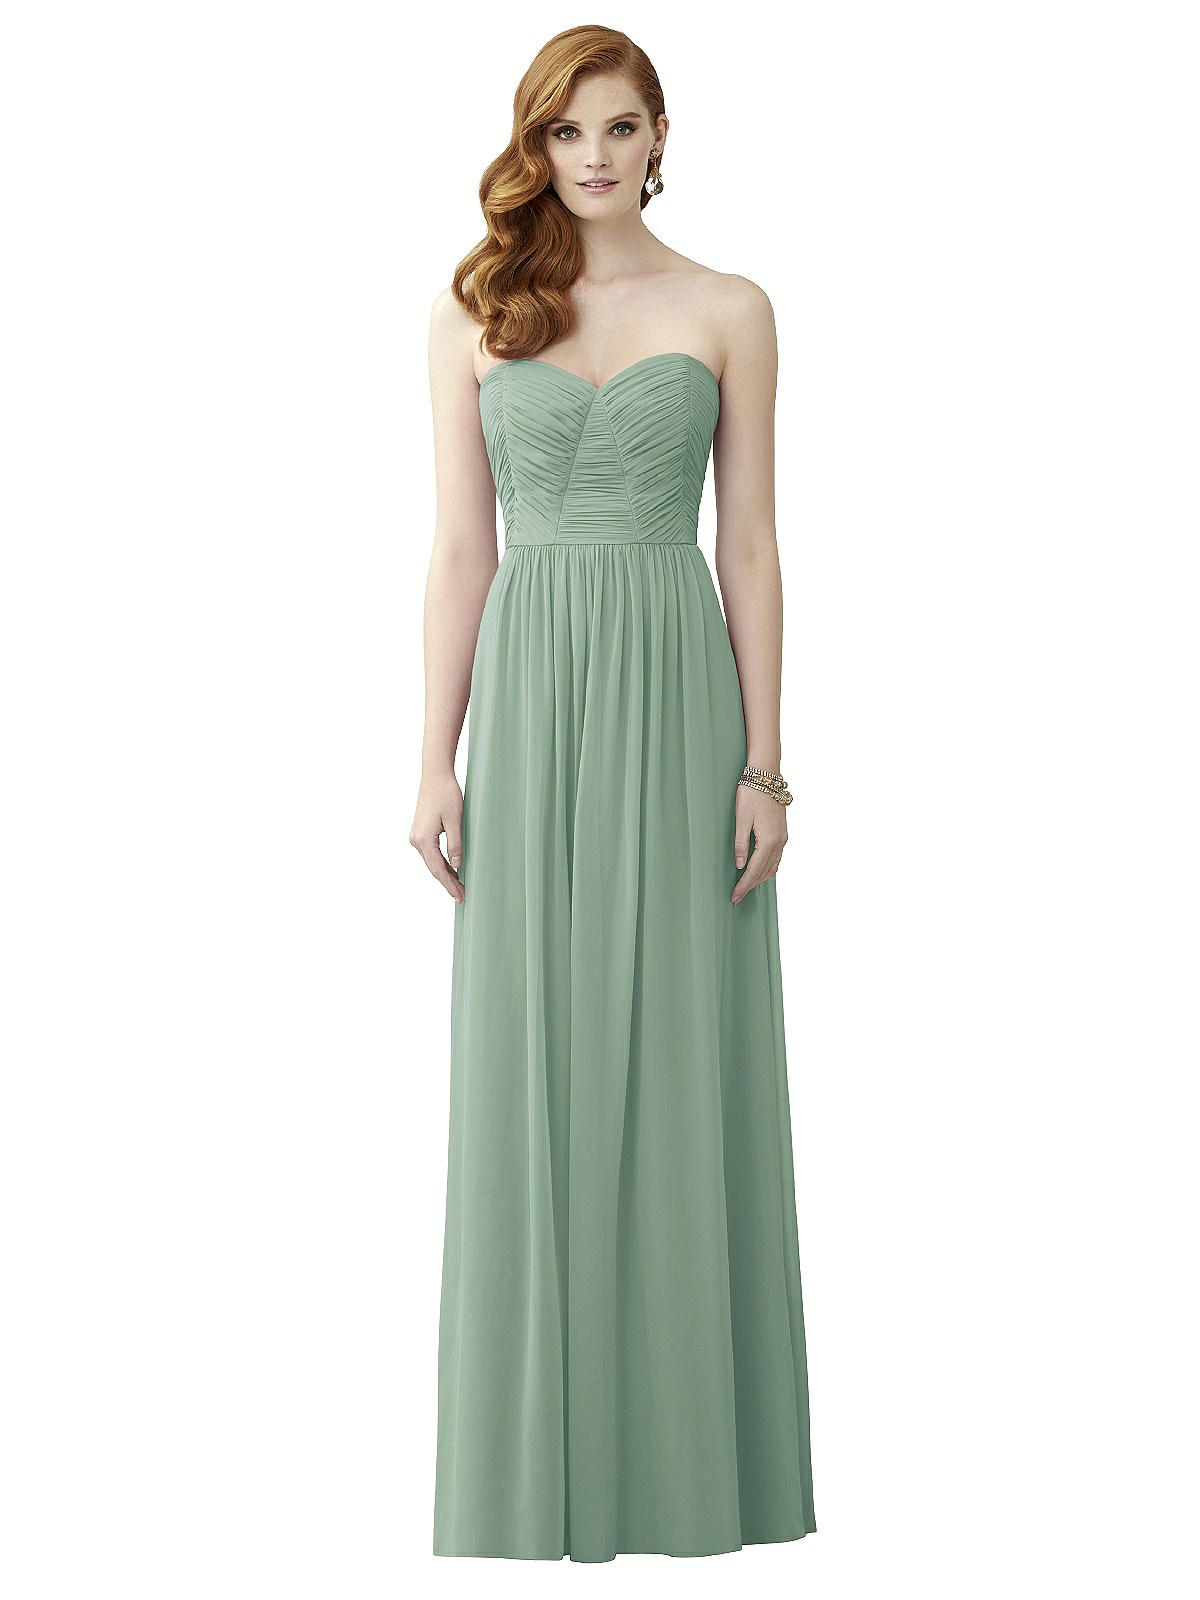 dessy collection bridesmaid dresses